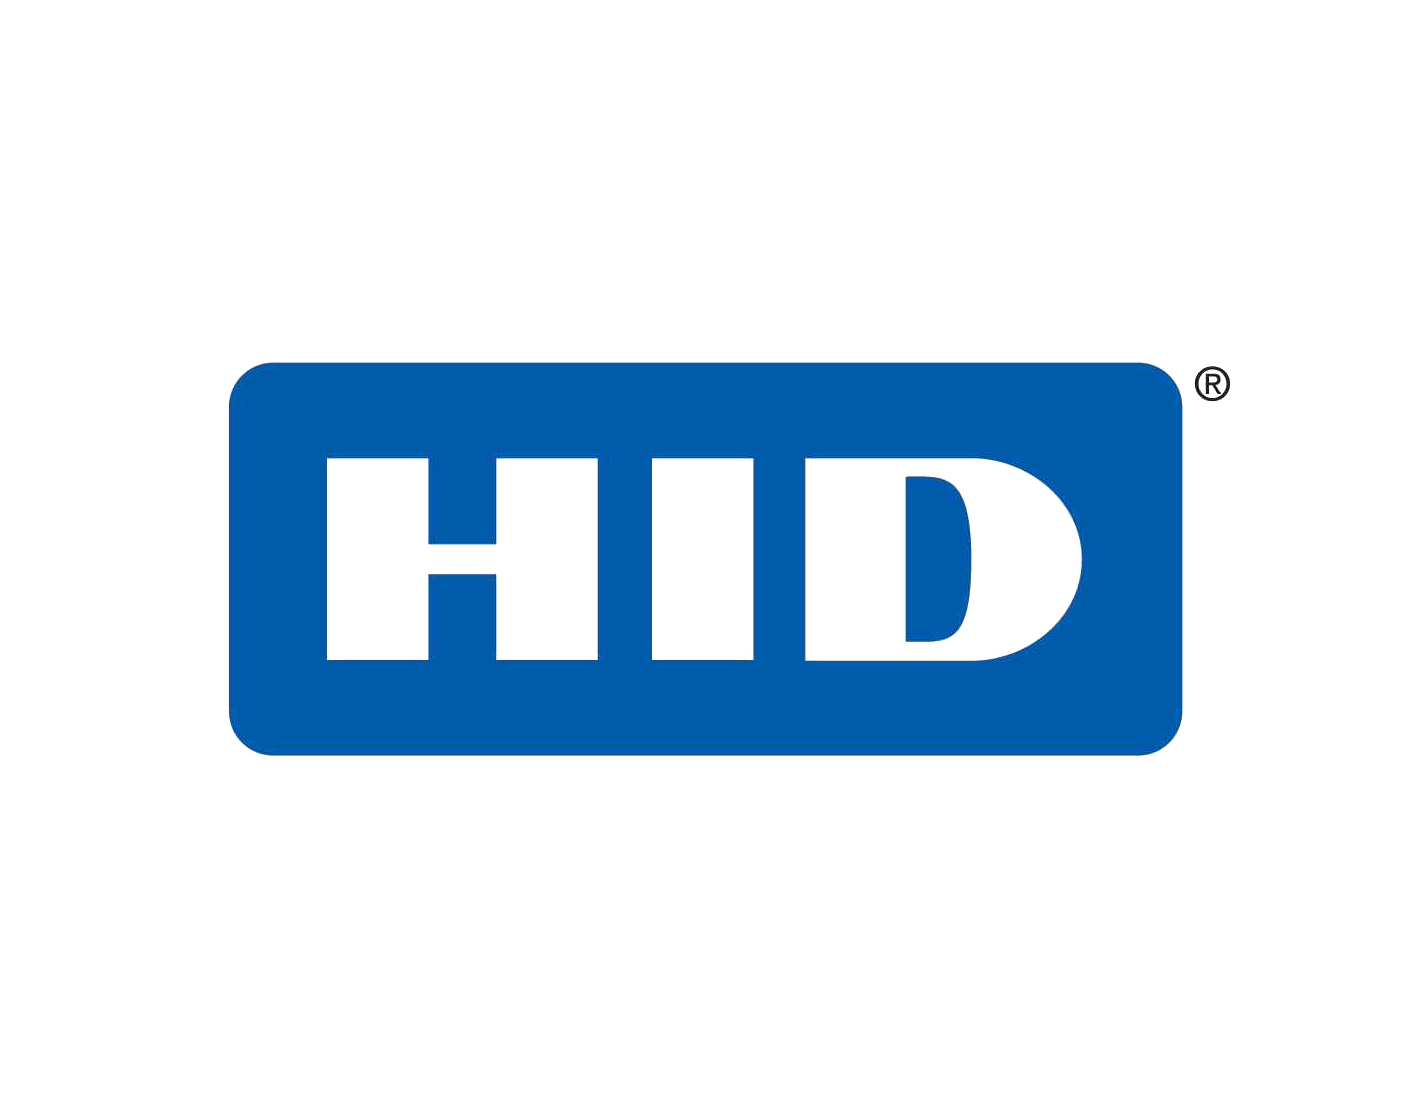 Hid